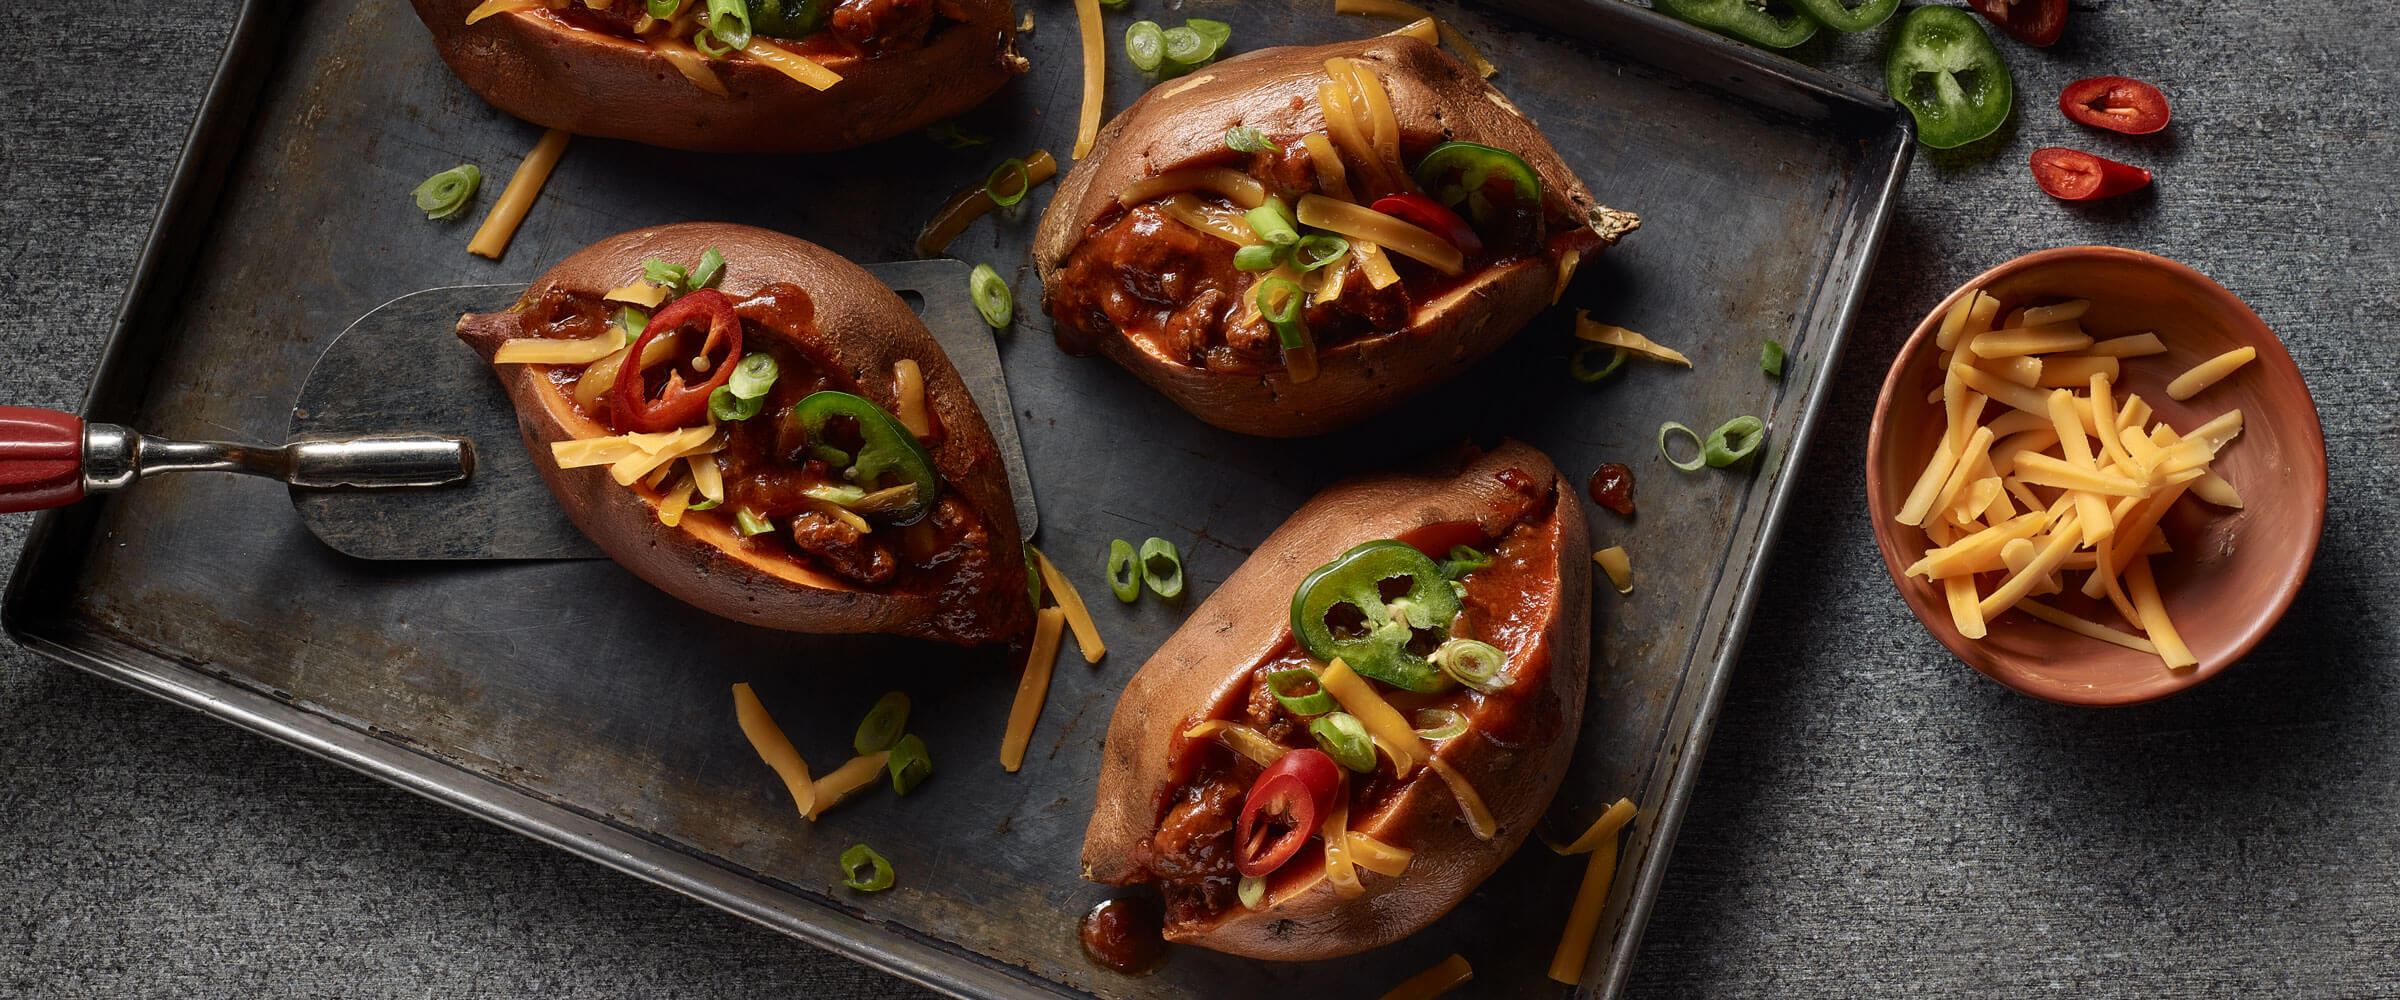 Chili Stuffed Sweet Potatoes topped with cheese and jalapenos on sheet pan